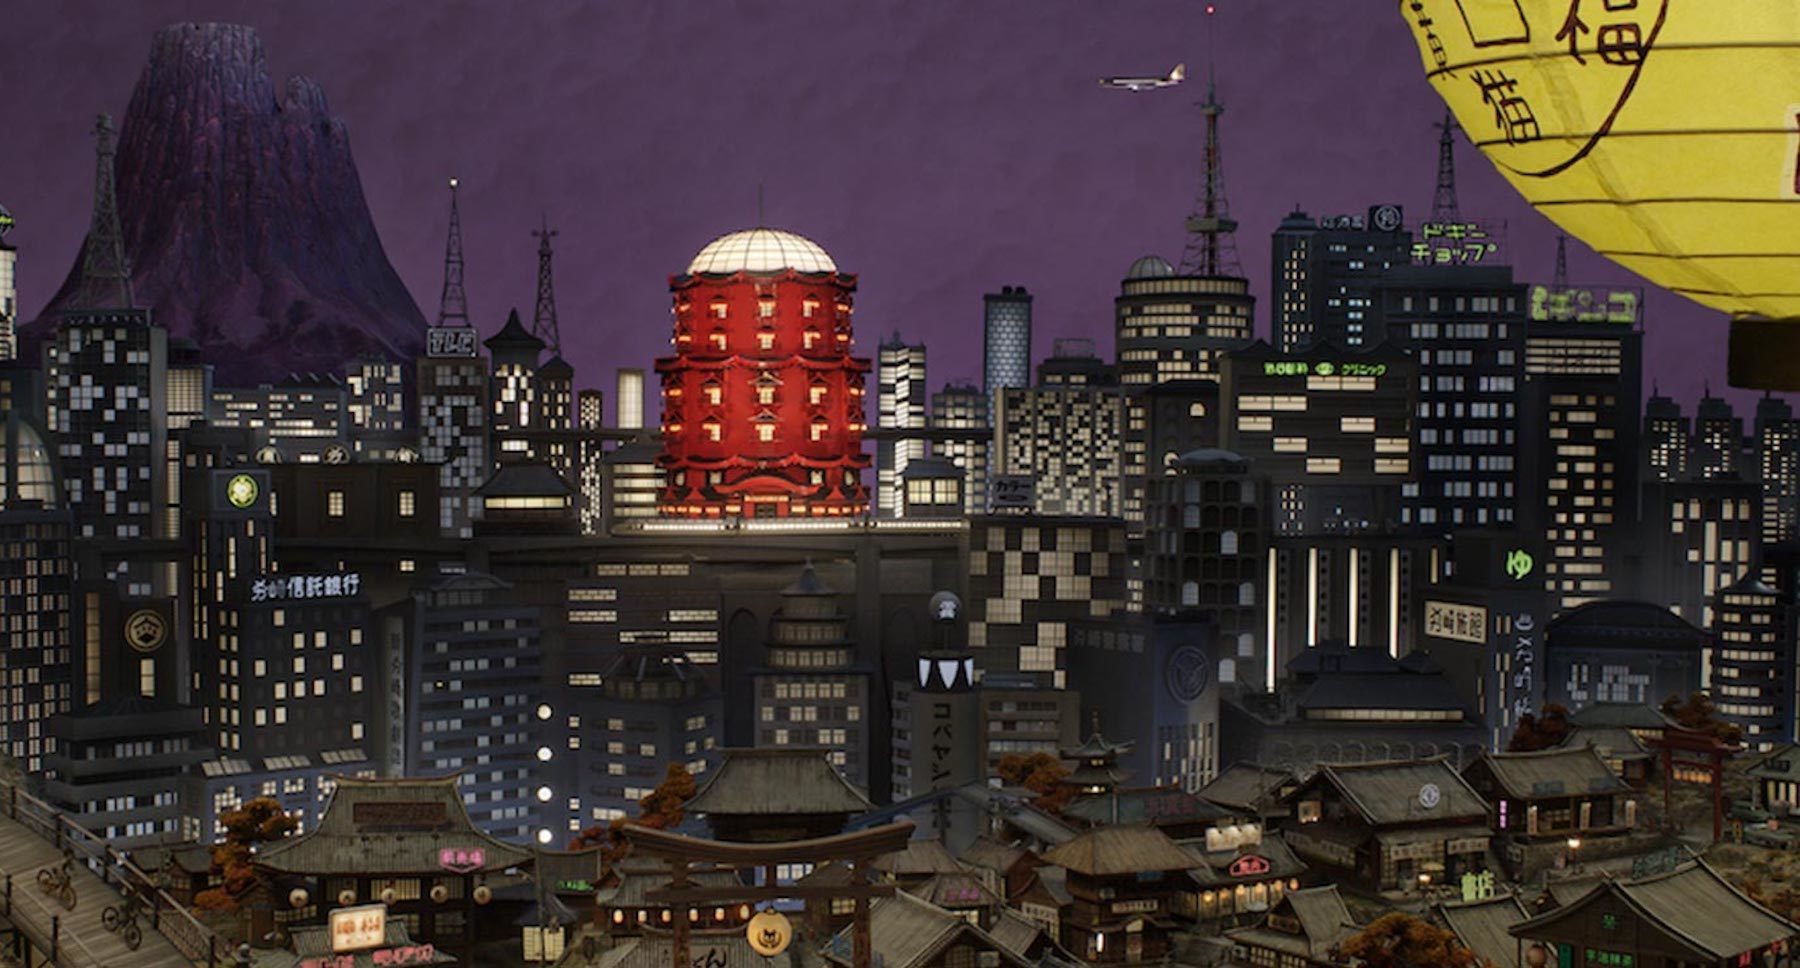 Cityscape in "Isle of Dogs"